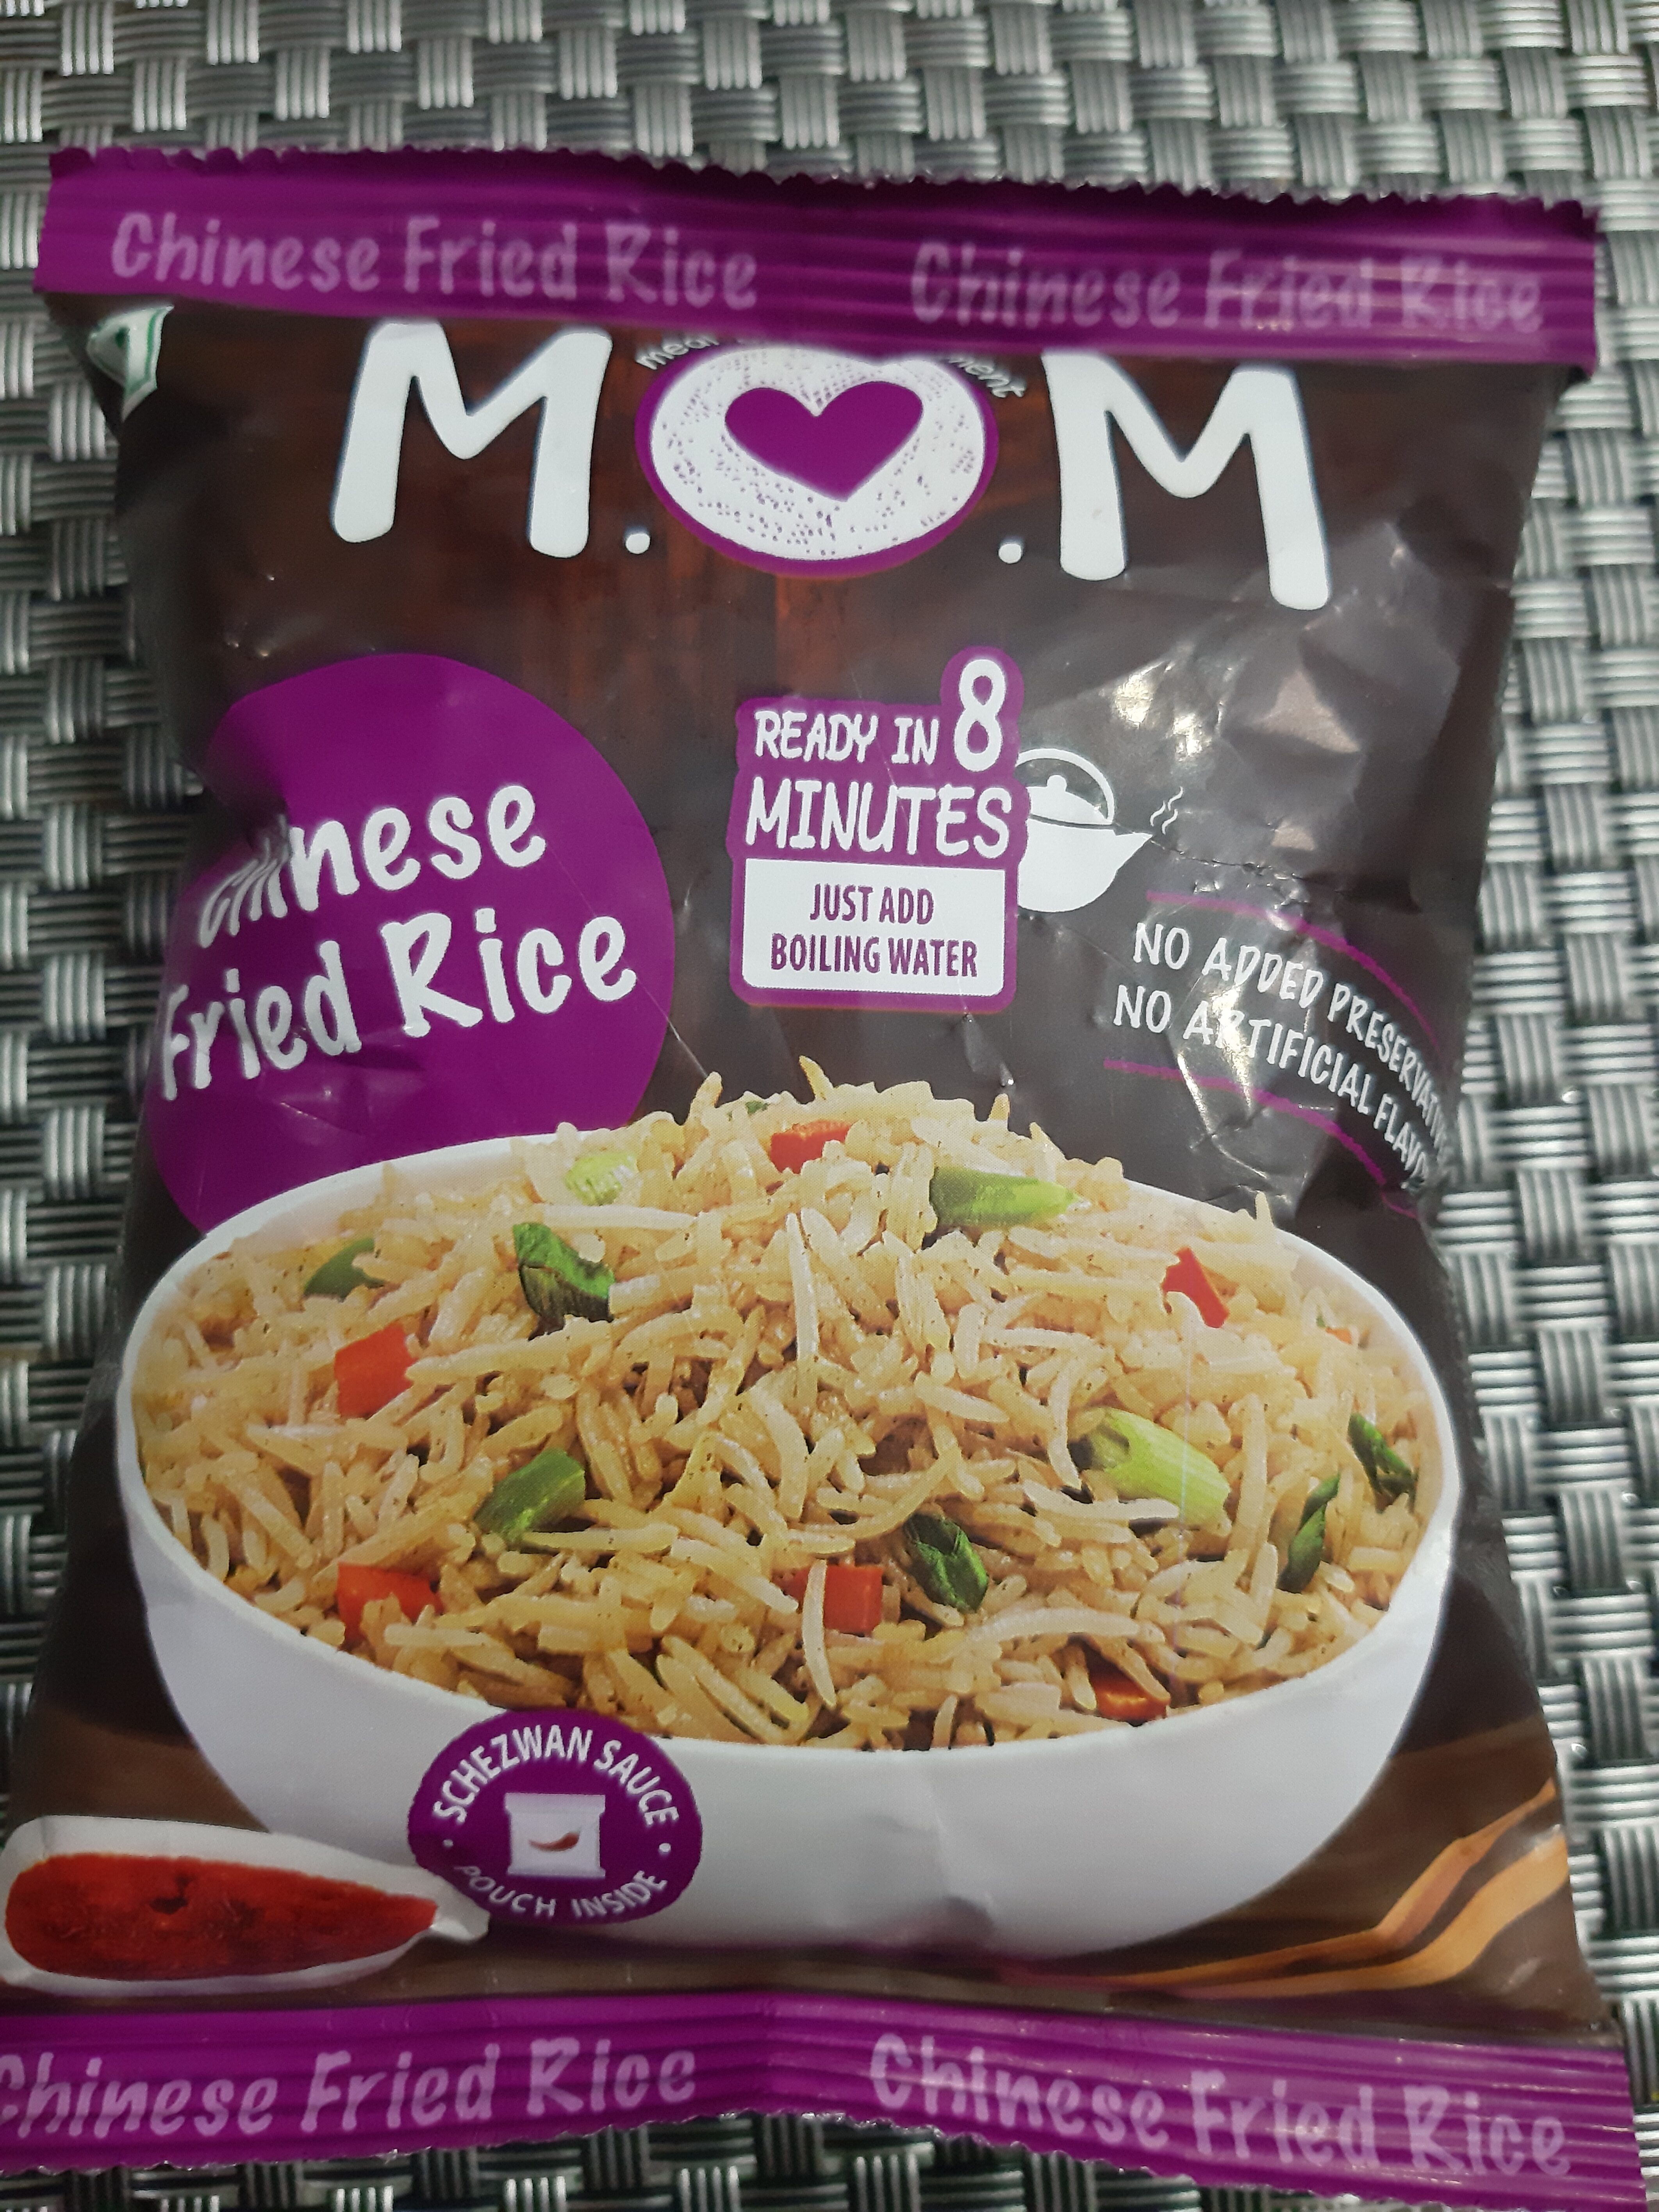 mom chinese fried rice - Product